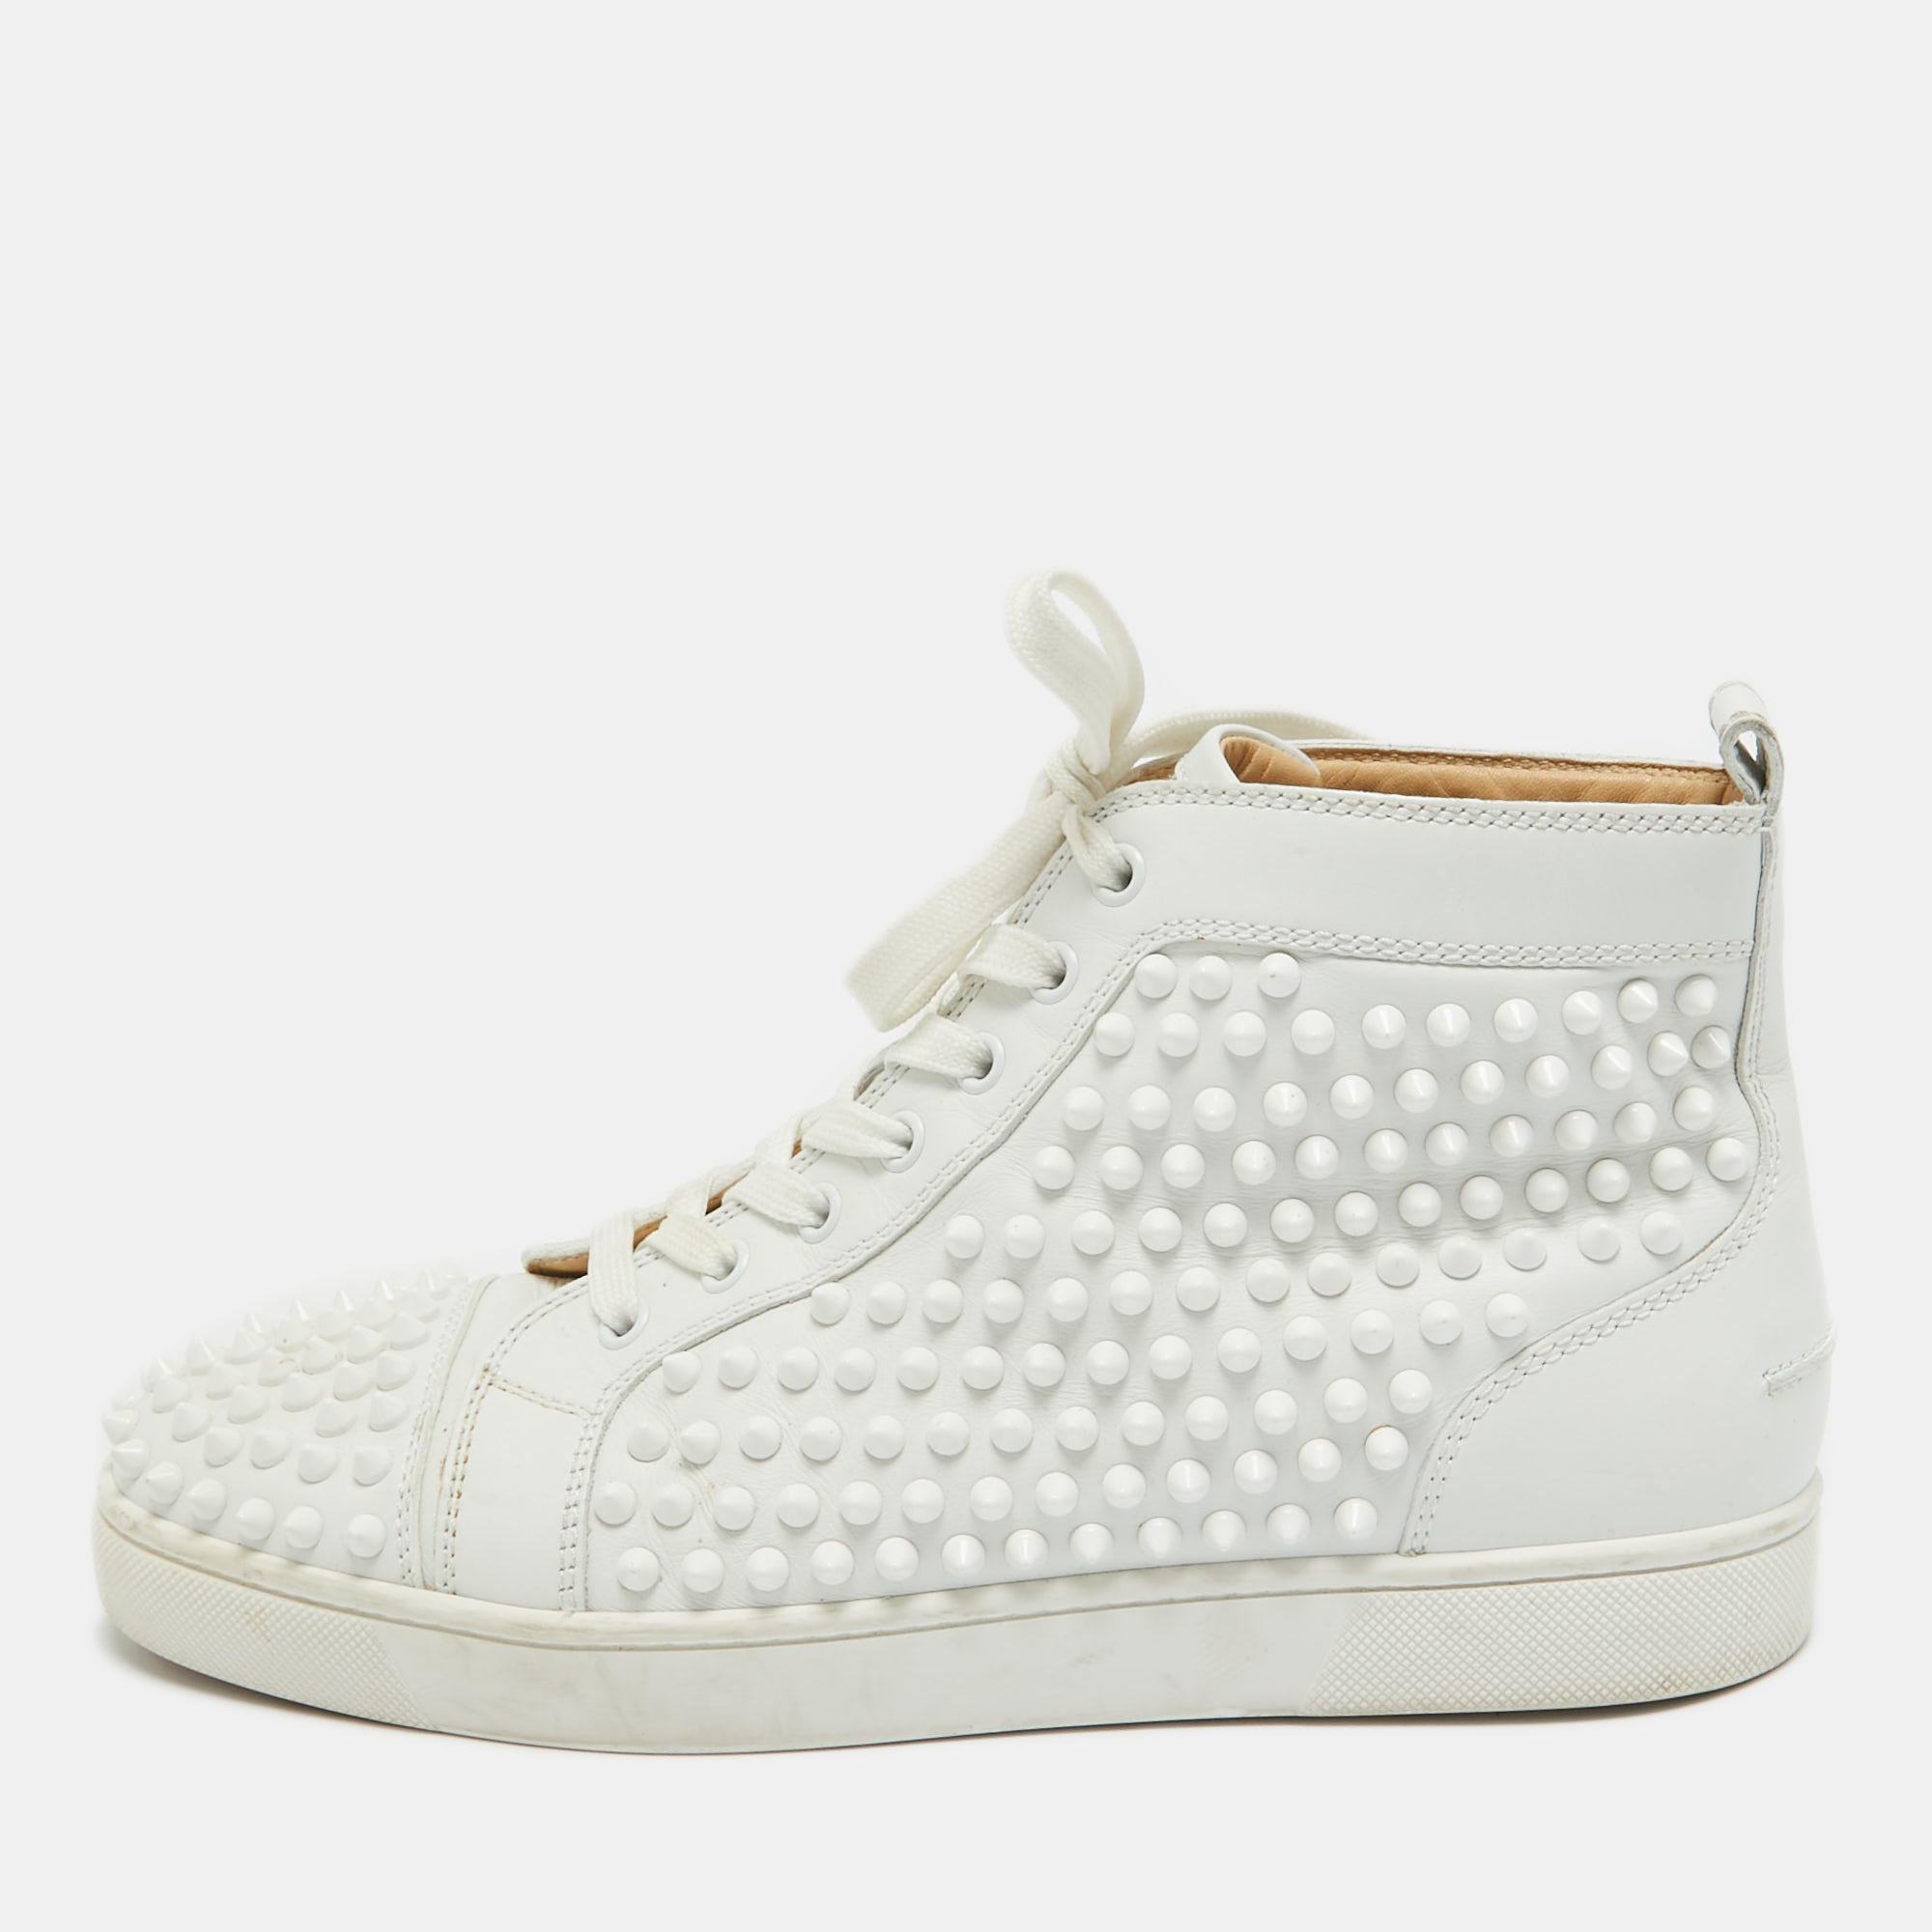 Pre-owned Christian Louboutin White Leather Louis Spikes High Top Sneakers Size 40.5